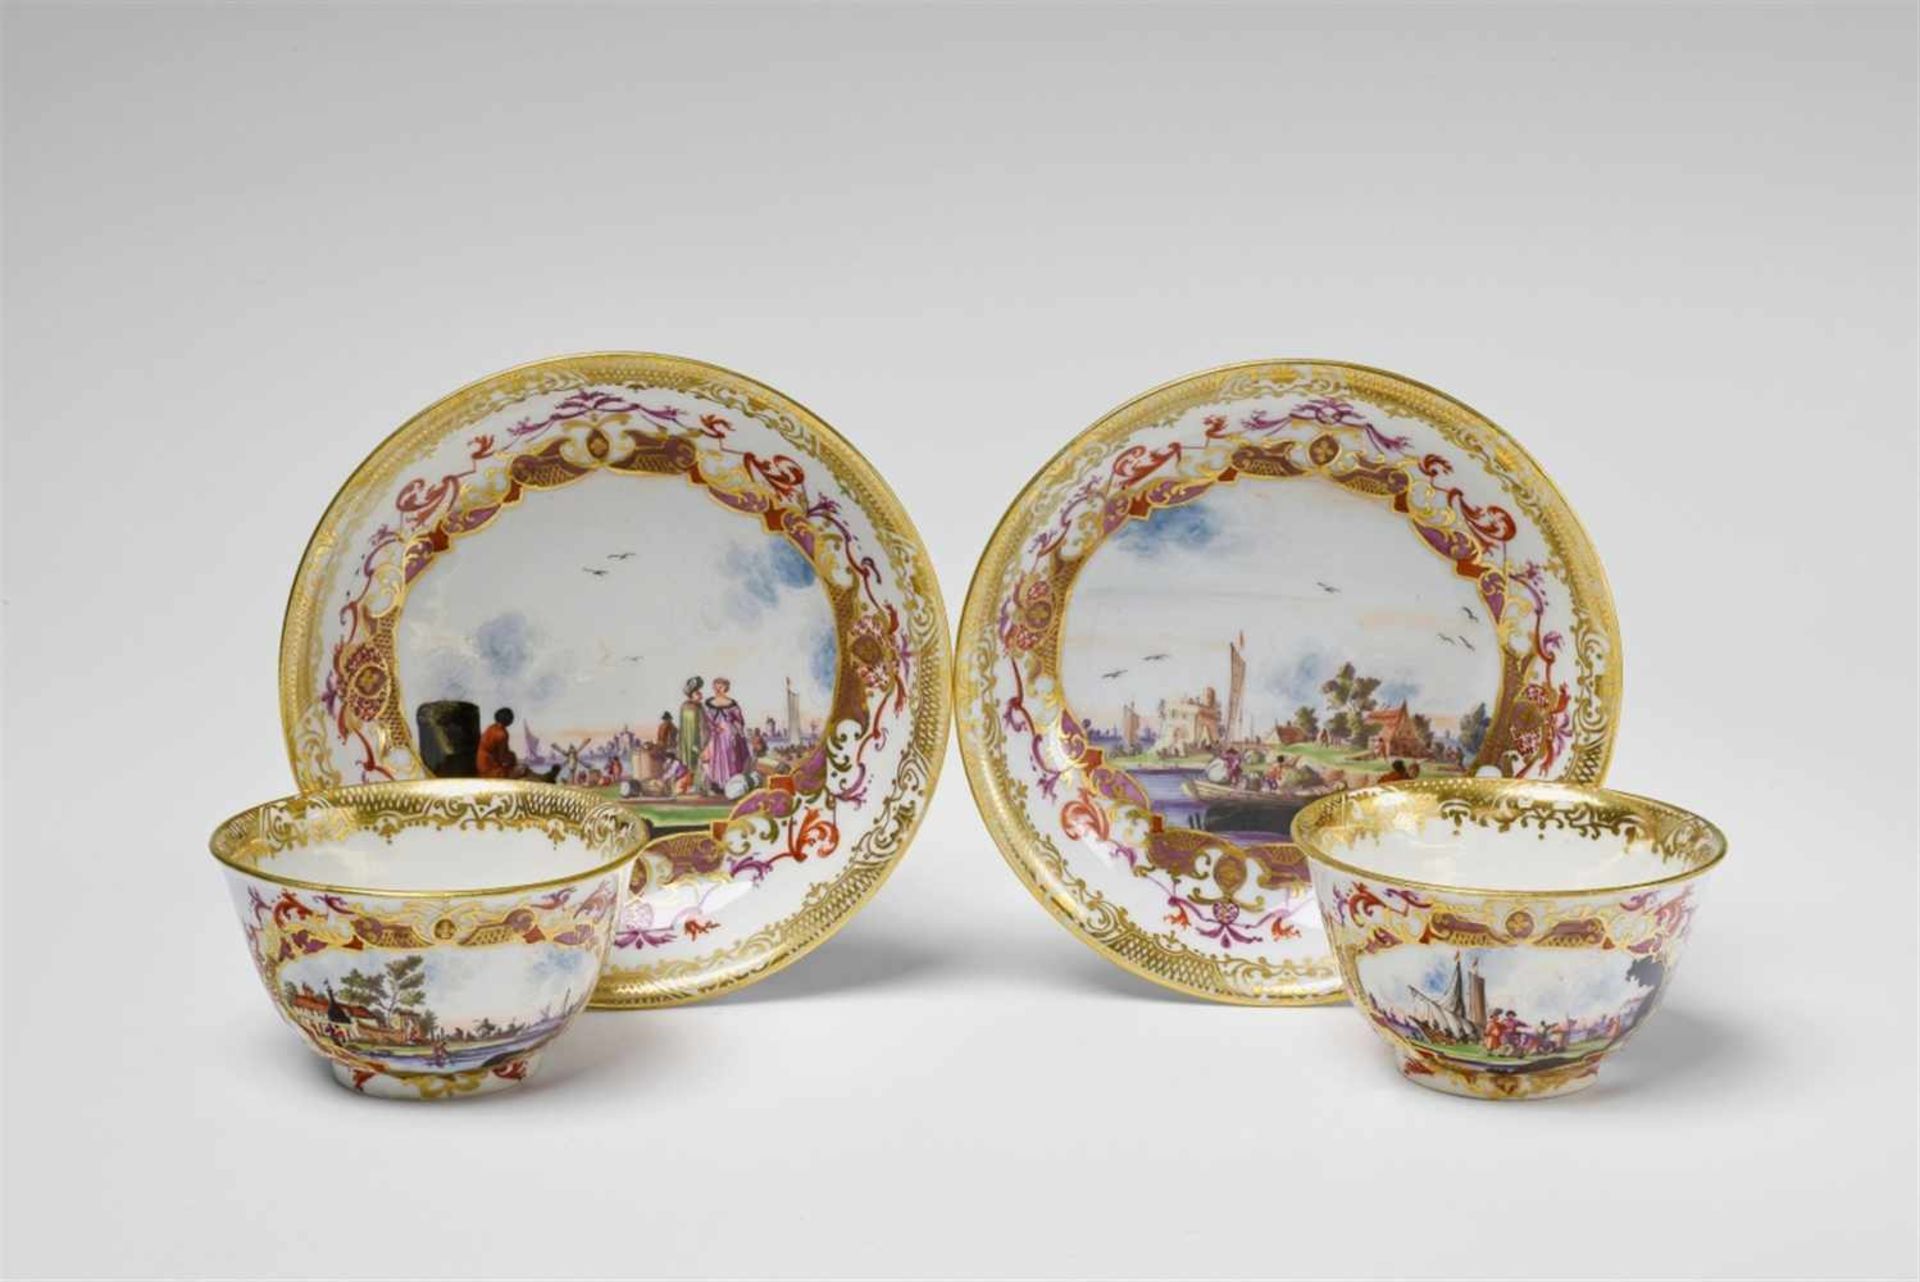 A pair of Meissen porcelain tea bowls with "kauffahrtei" scenesWith original saucer. Painted with